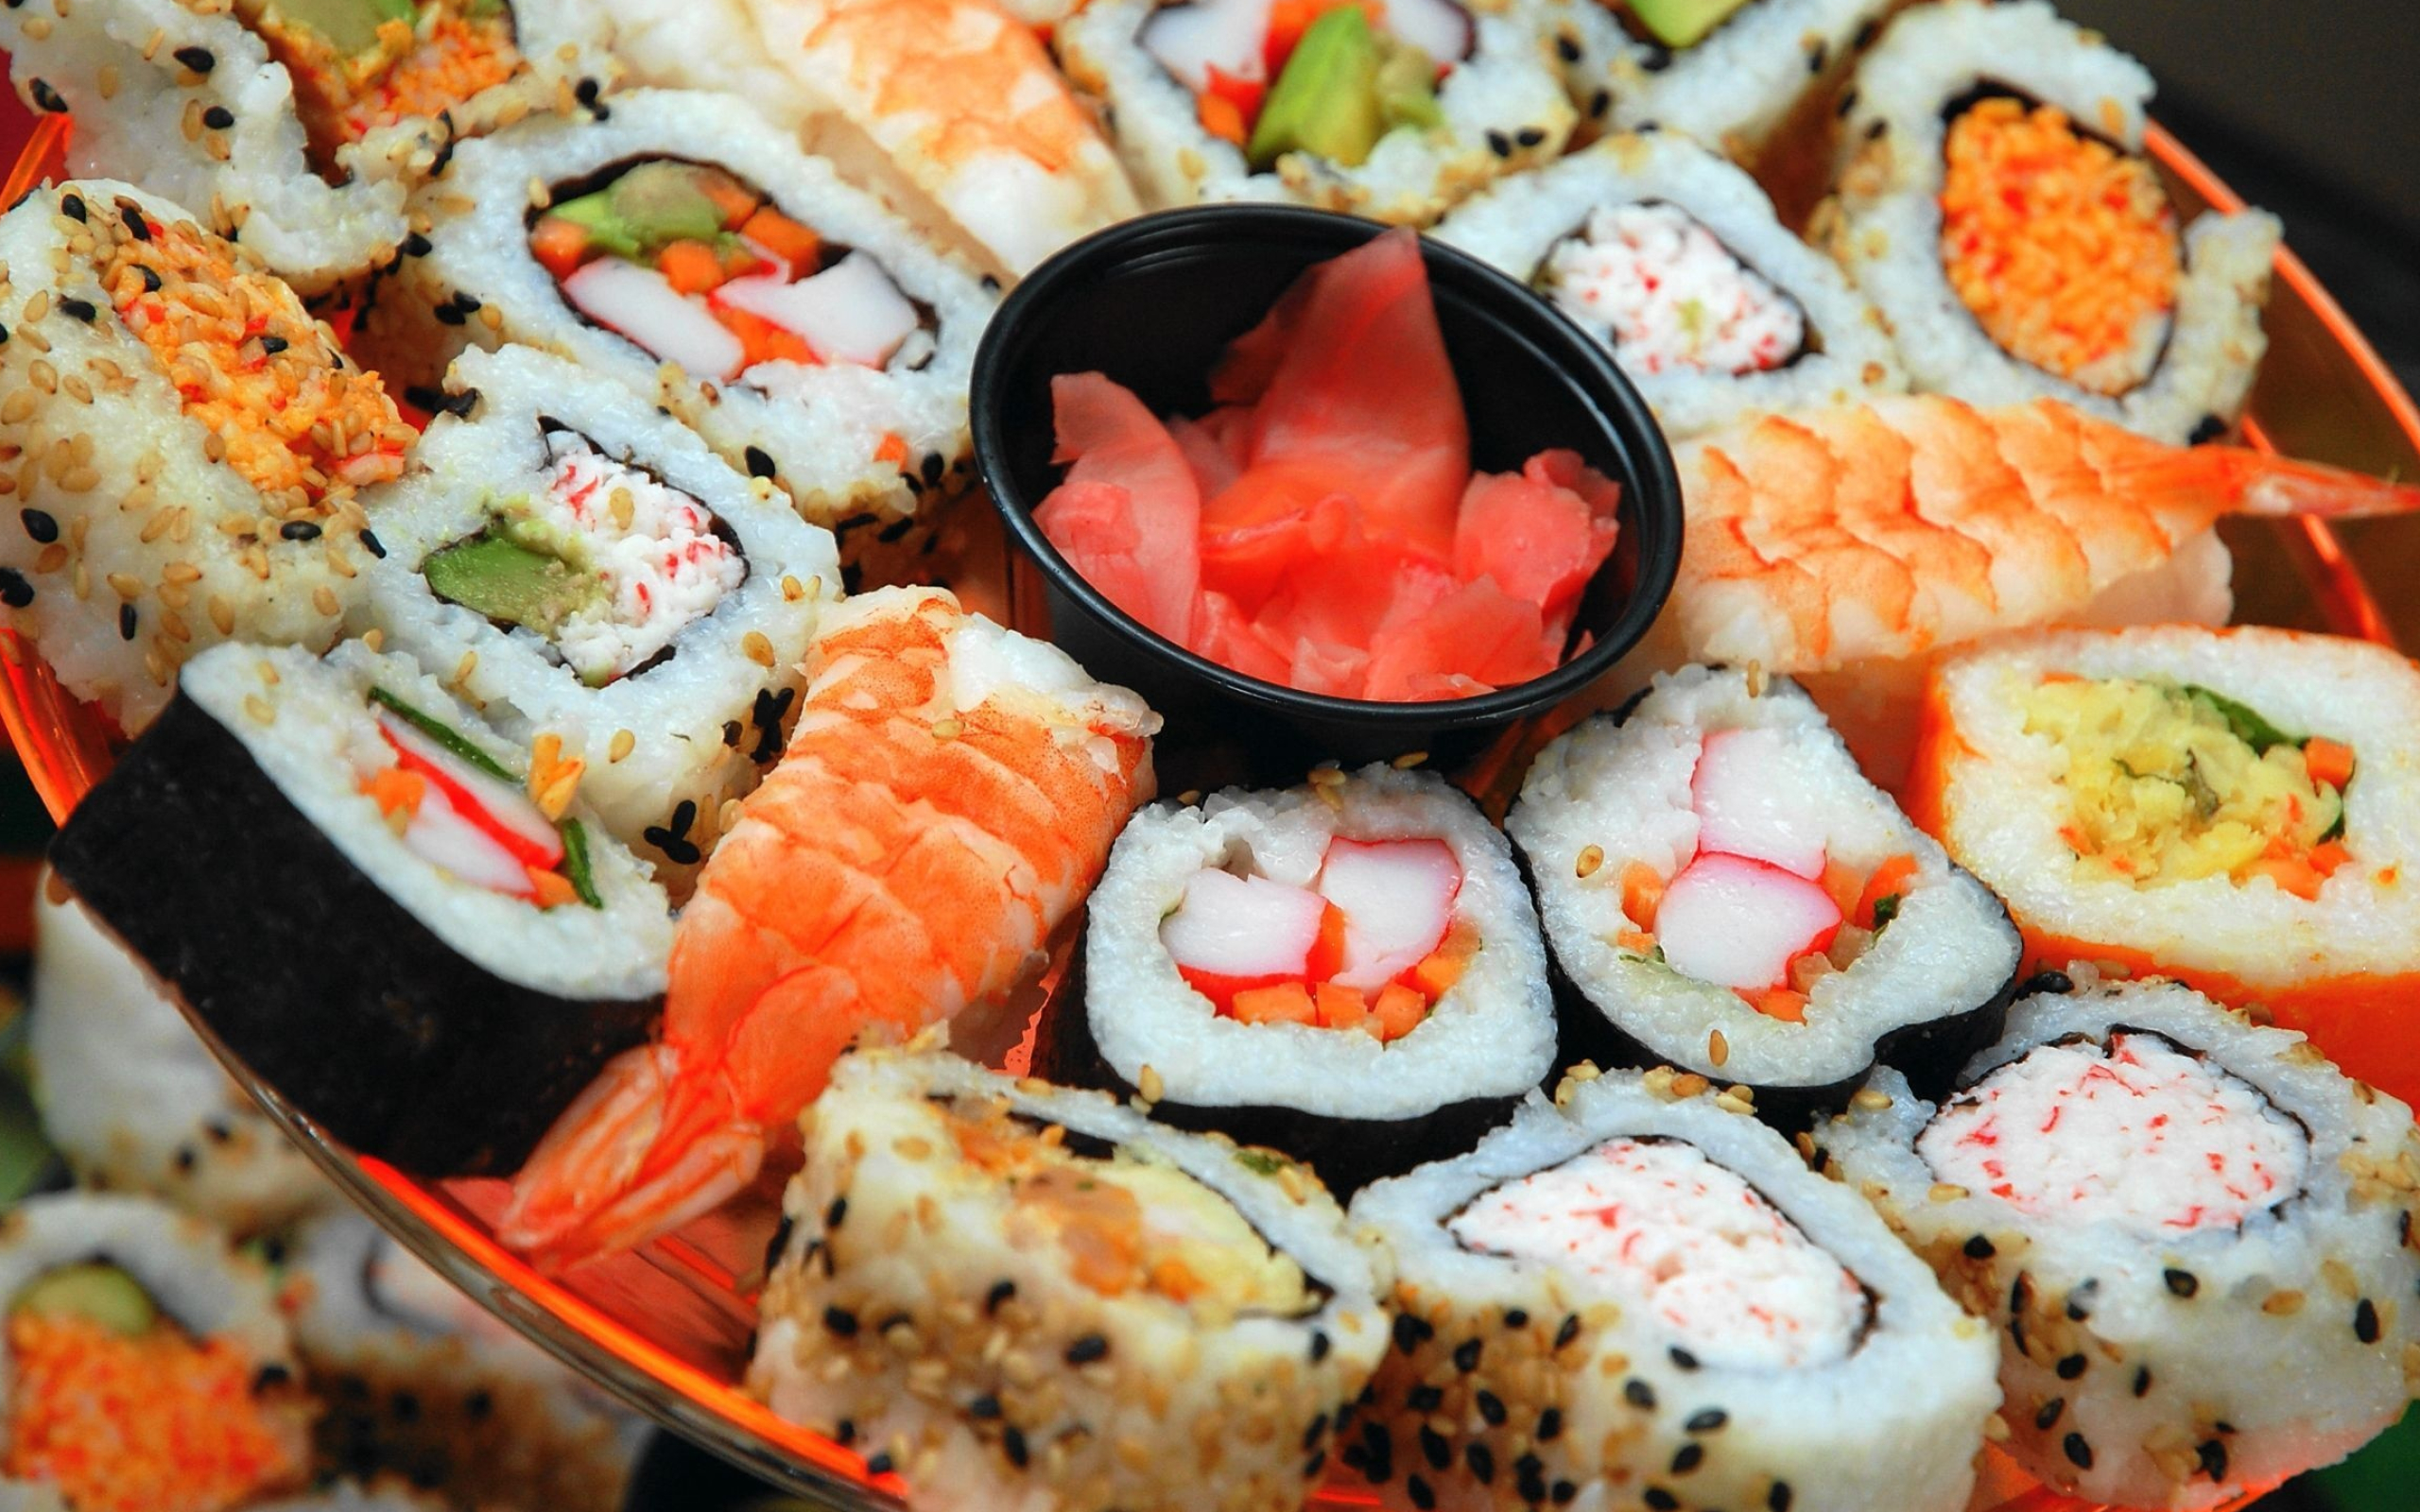 Sushi: Wasabi, also known as Chinese horseradish, a common ingredient in rolls. 2560x1600 HD Wallpaper.